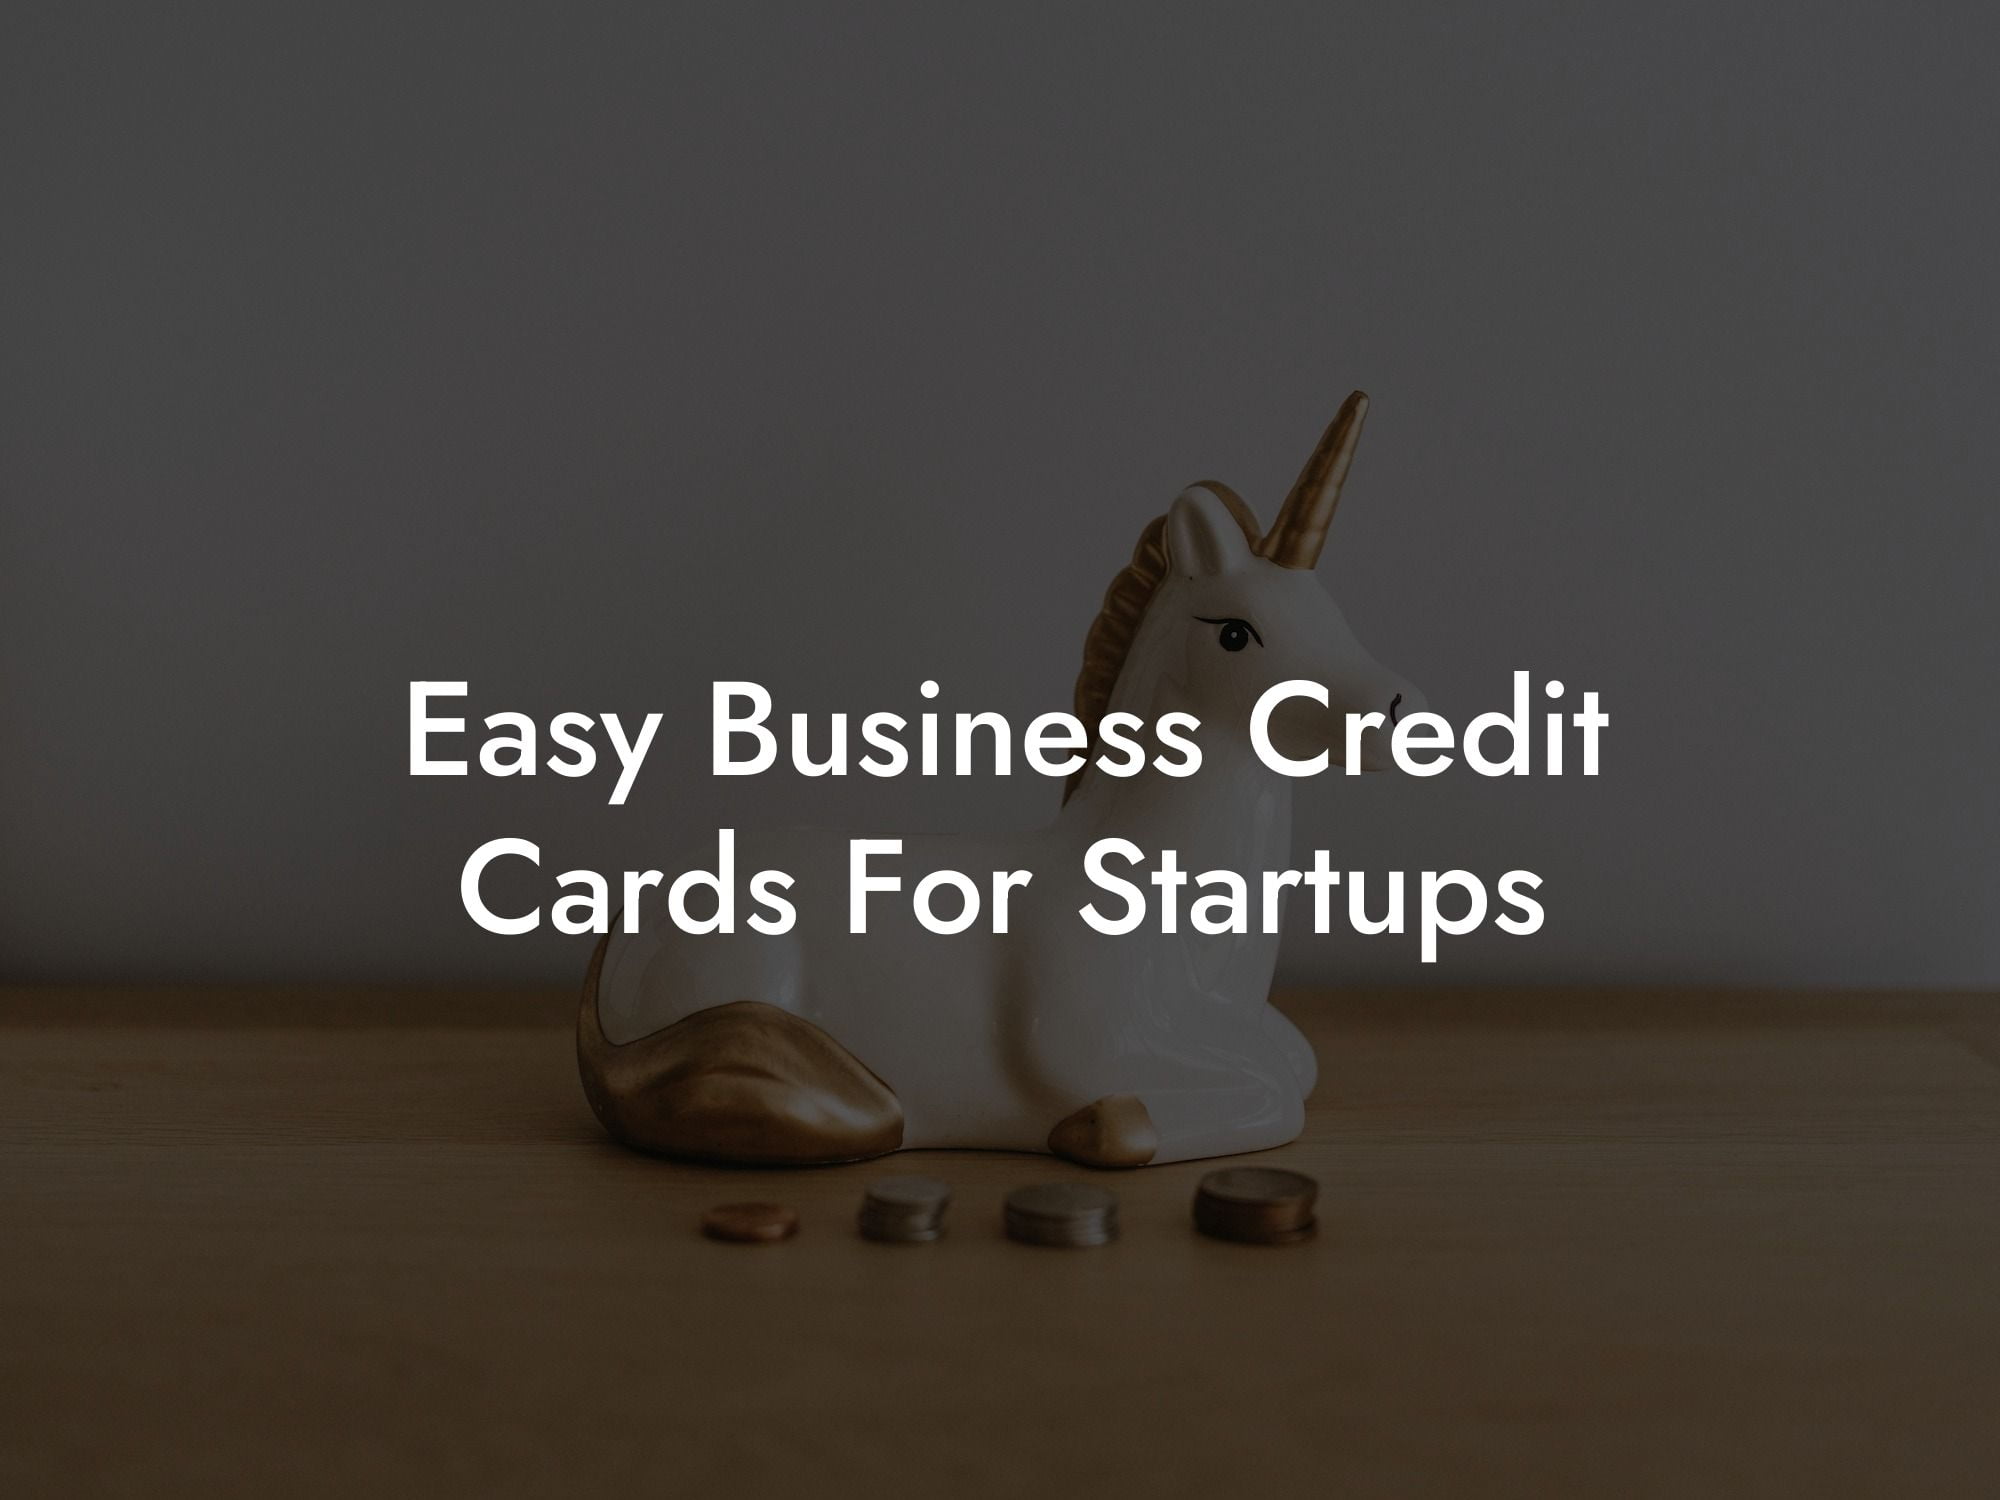 Easy Business Credit Cards For Startups